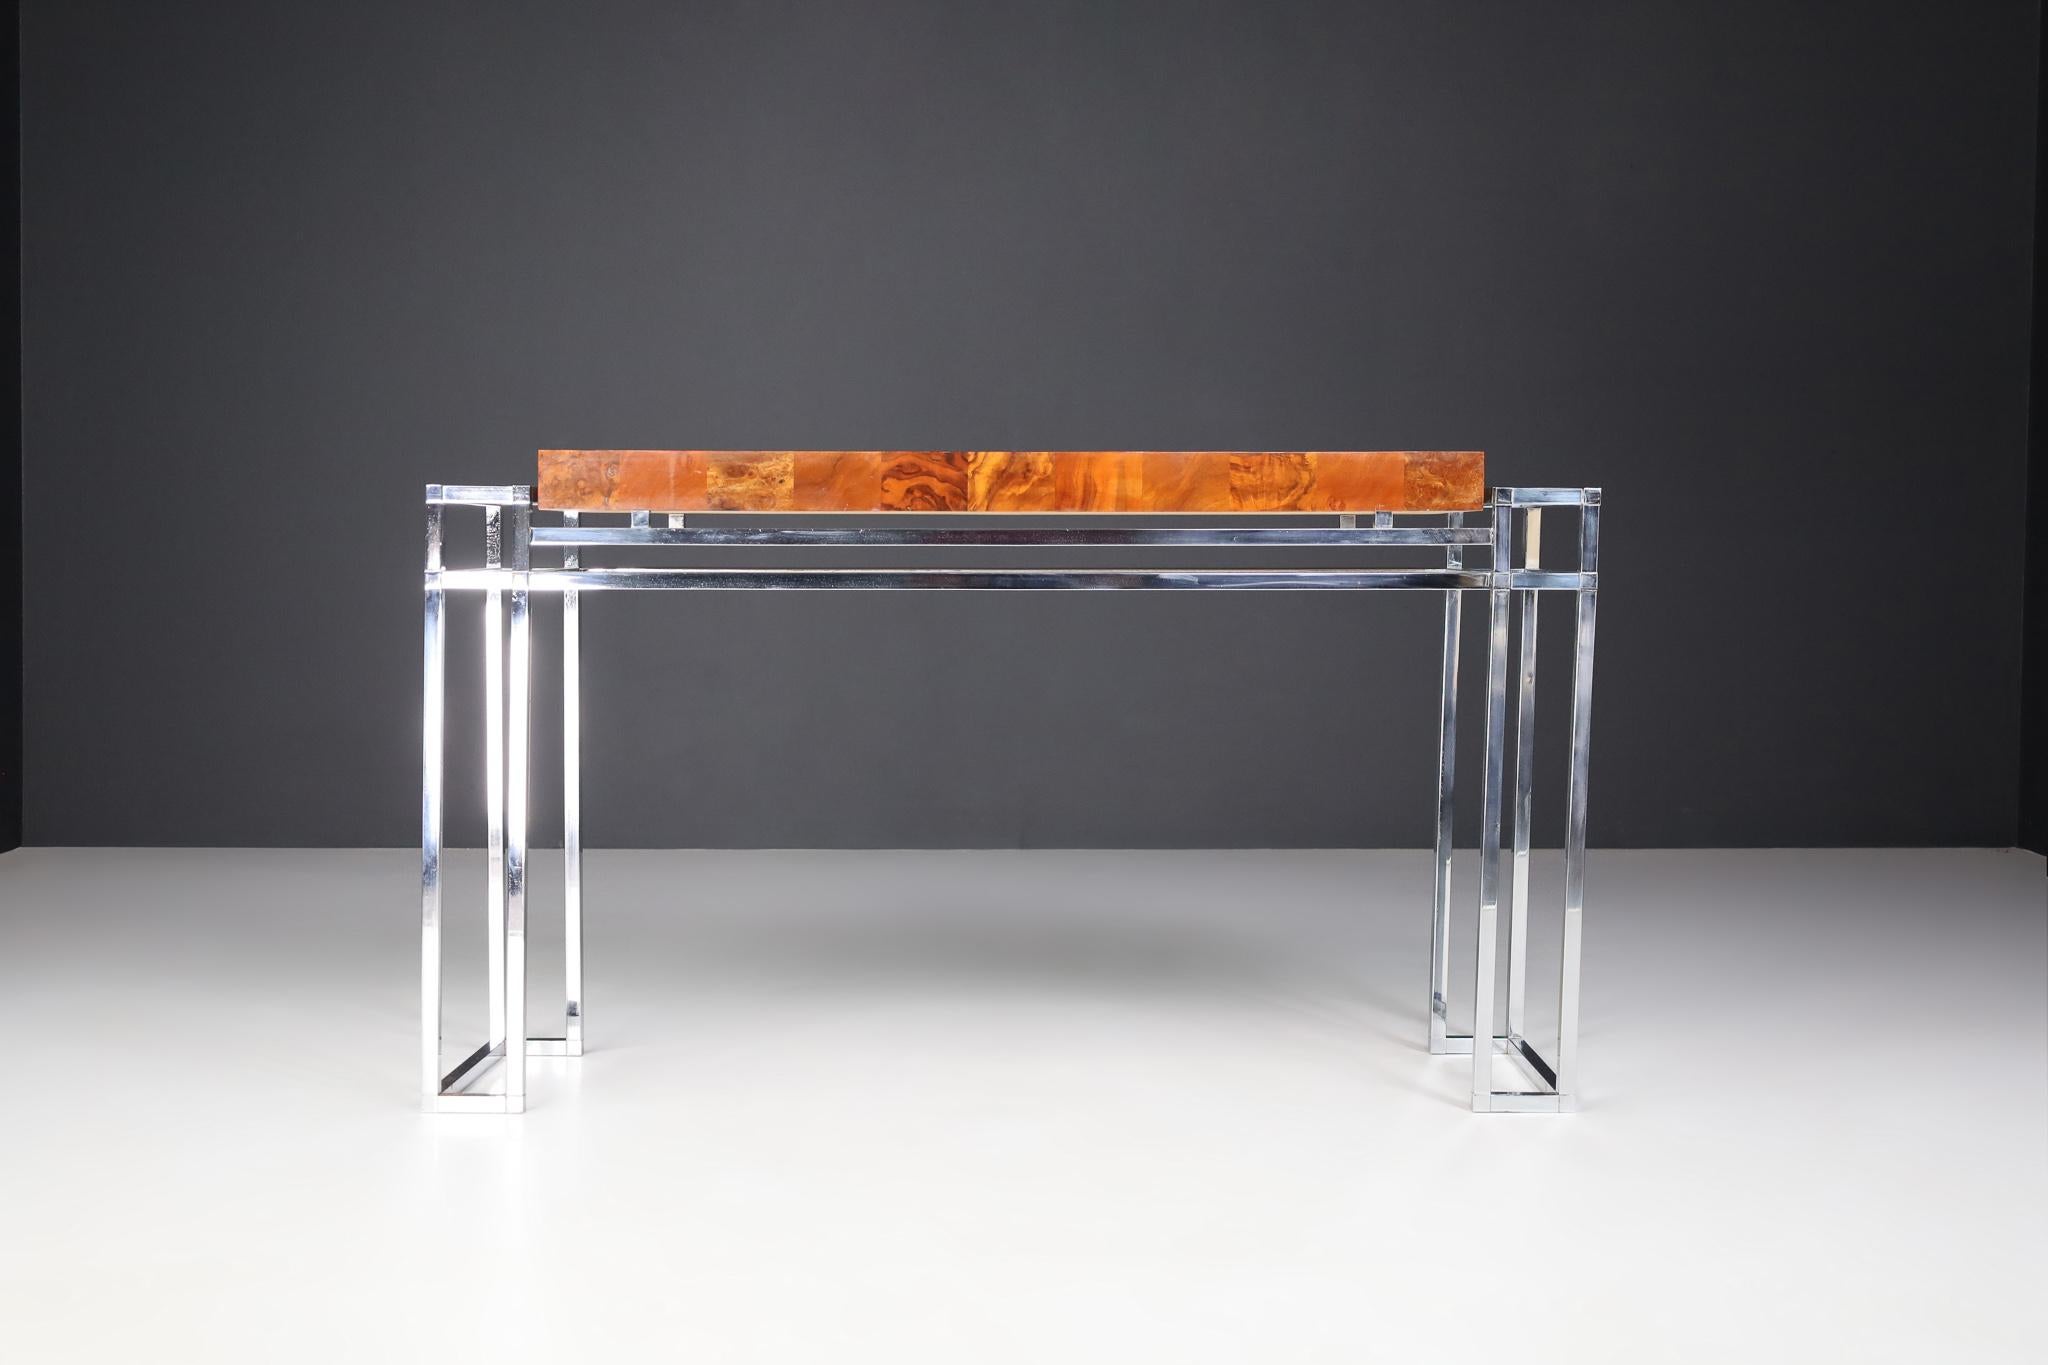 Mid-century Italian burl console table by Willy Rizzo 1970s.

Italian modern piece from the late 1970s Art Deco. This stylish modern Italian console table makes an elegant hall or entry table with an impressive mixture of vintage brass, chrome,